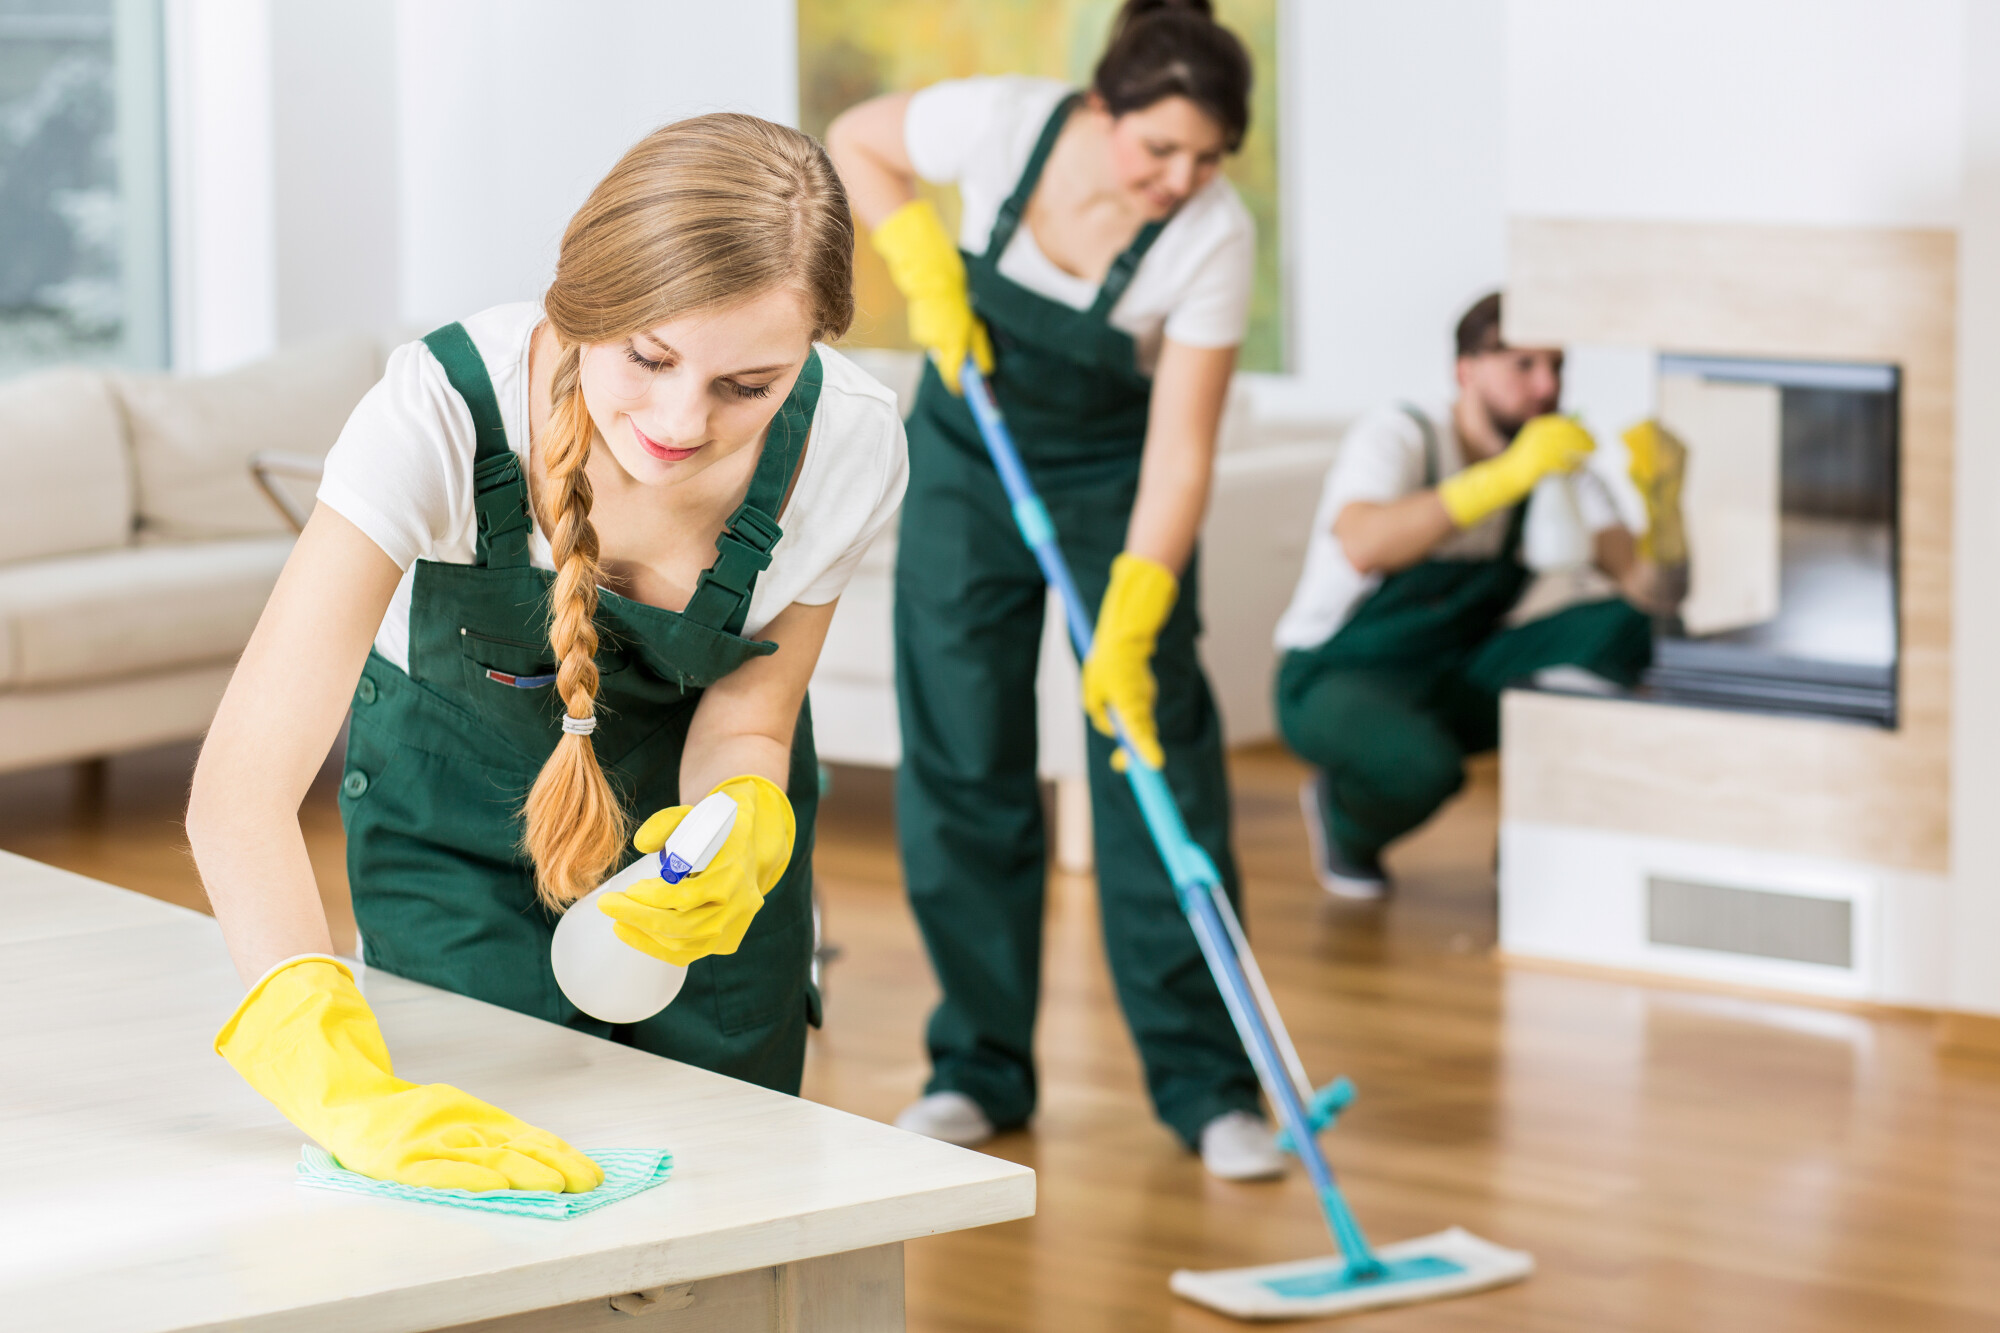 Hiring professional cleaners is a great way to make sure your home is spotless without having to lift a finger. Click here to learn more about these services.